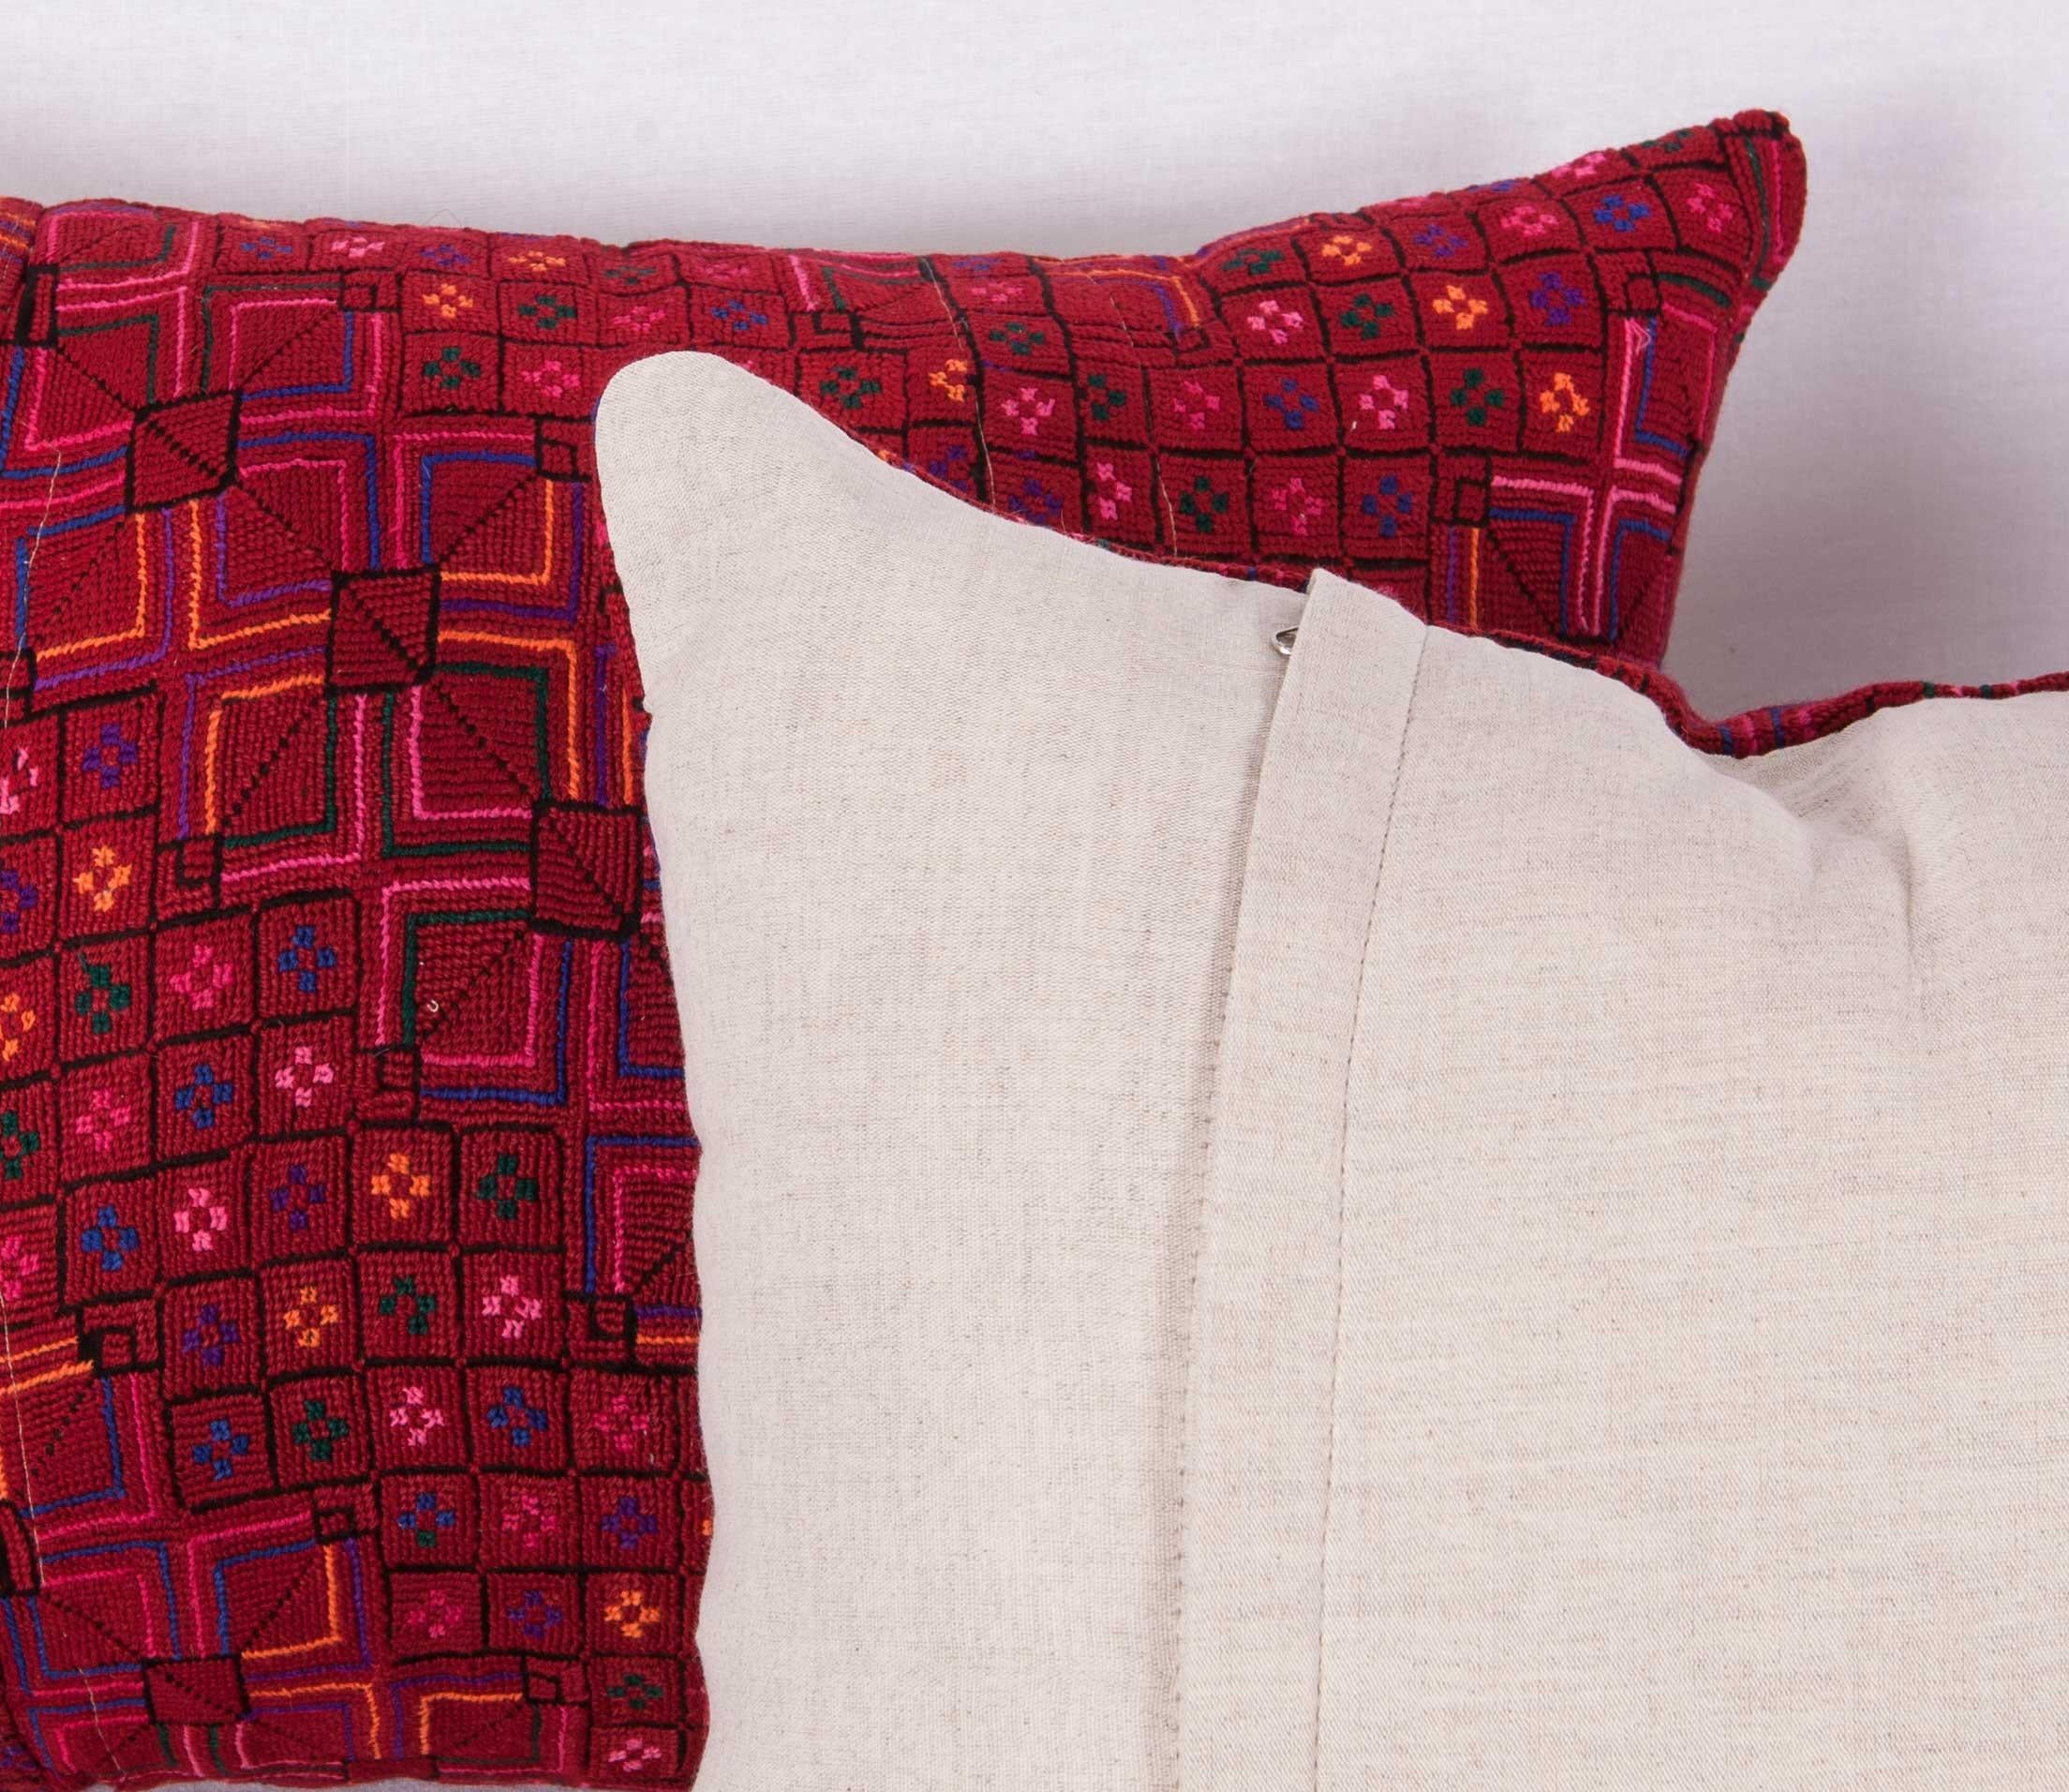 Embroidered Pillow Cases or Cushions Made from a Middle Eastern Syrian Bedouin Embroidery